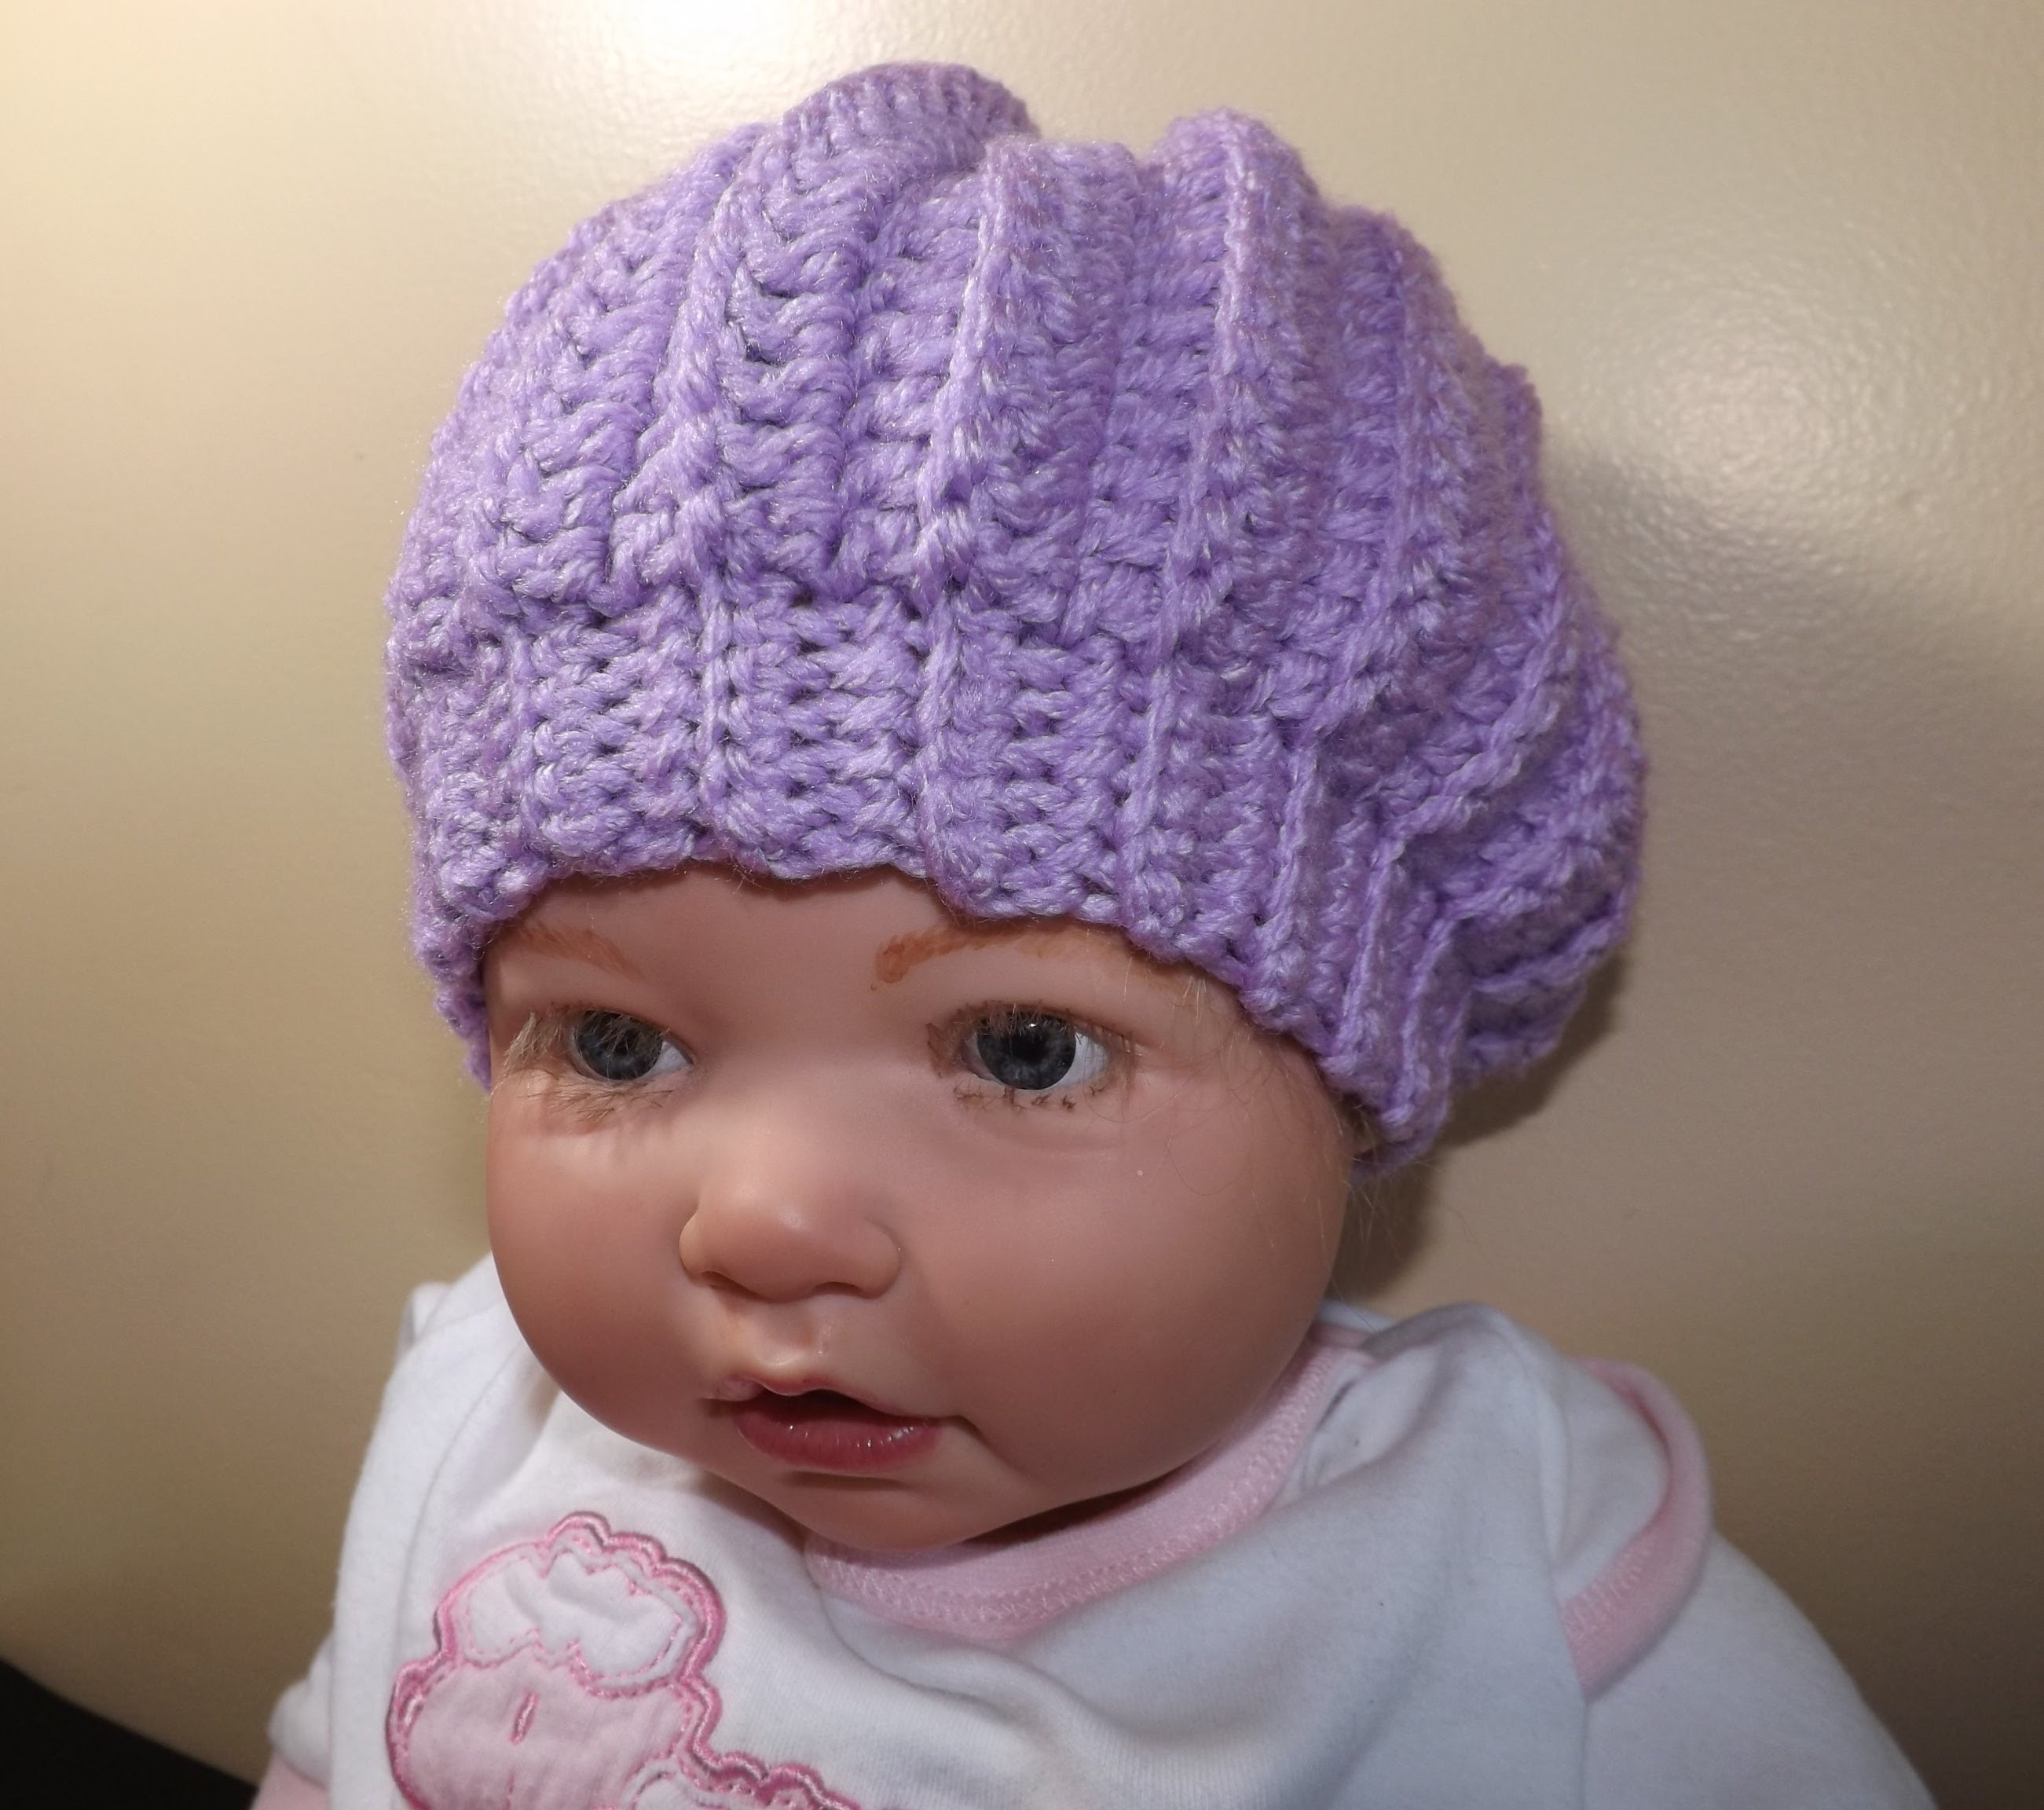 Crochet cap for babies crochet baby hat - with ruby stedman - youtube QUOMRNL